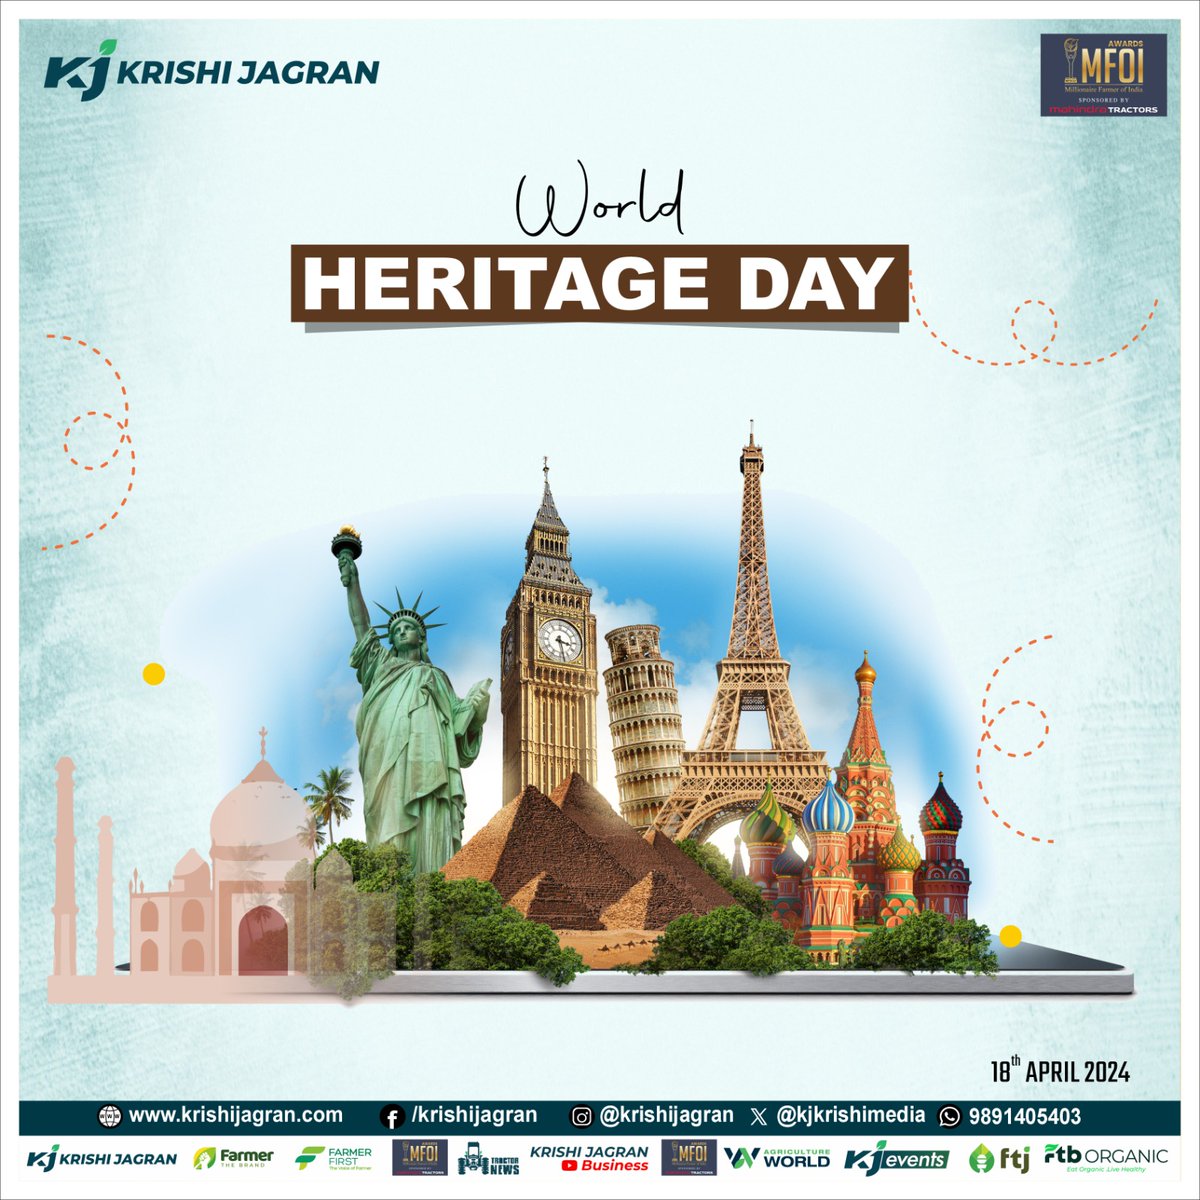 Happy 𝐖𝐨𝐫𝐥𝐝 𝐇𝐞𝐫𝐢𝐭𝐚𝐠𝐞 𝐃𝐚𝐲 from Krishi Jagran!
Let's celebrate and protect our rich cultural heritage for generations to come.

#WorldHeritageDay #culturalheritage #HeritageConservation #heritageawareness #HistoricalHeritage #CulturalPreservation